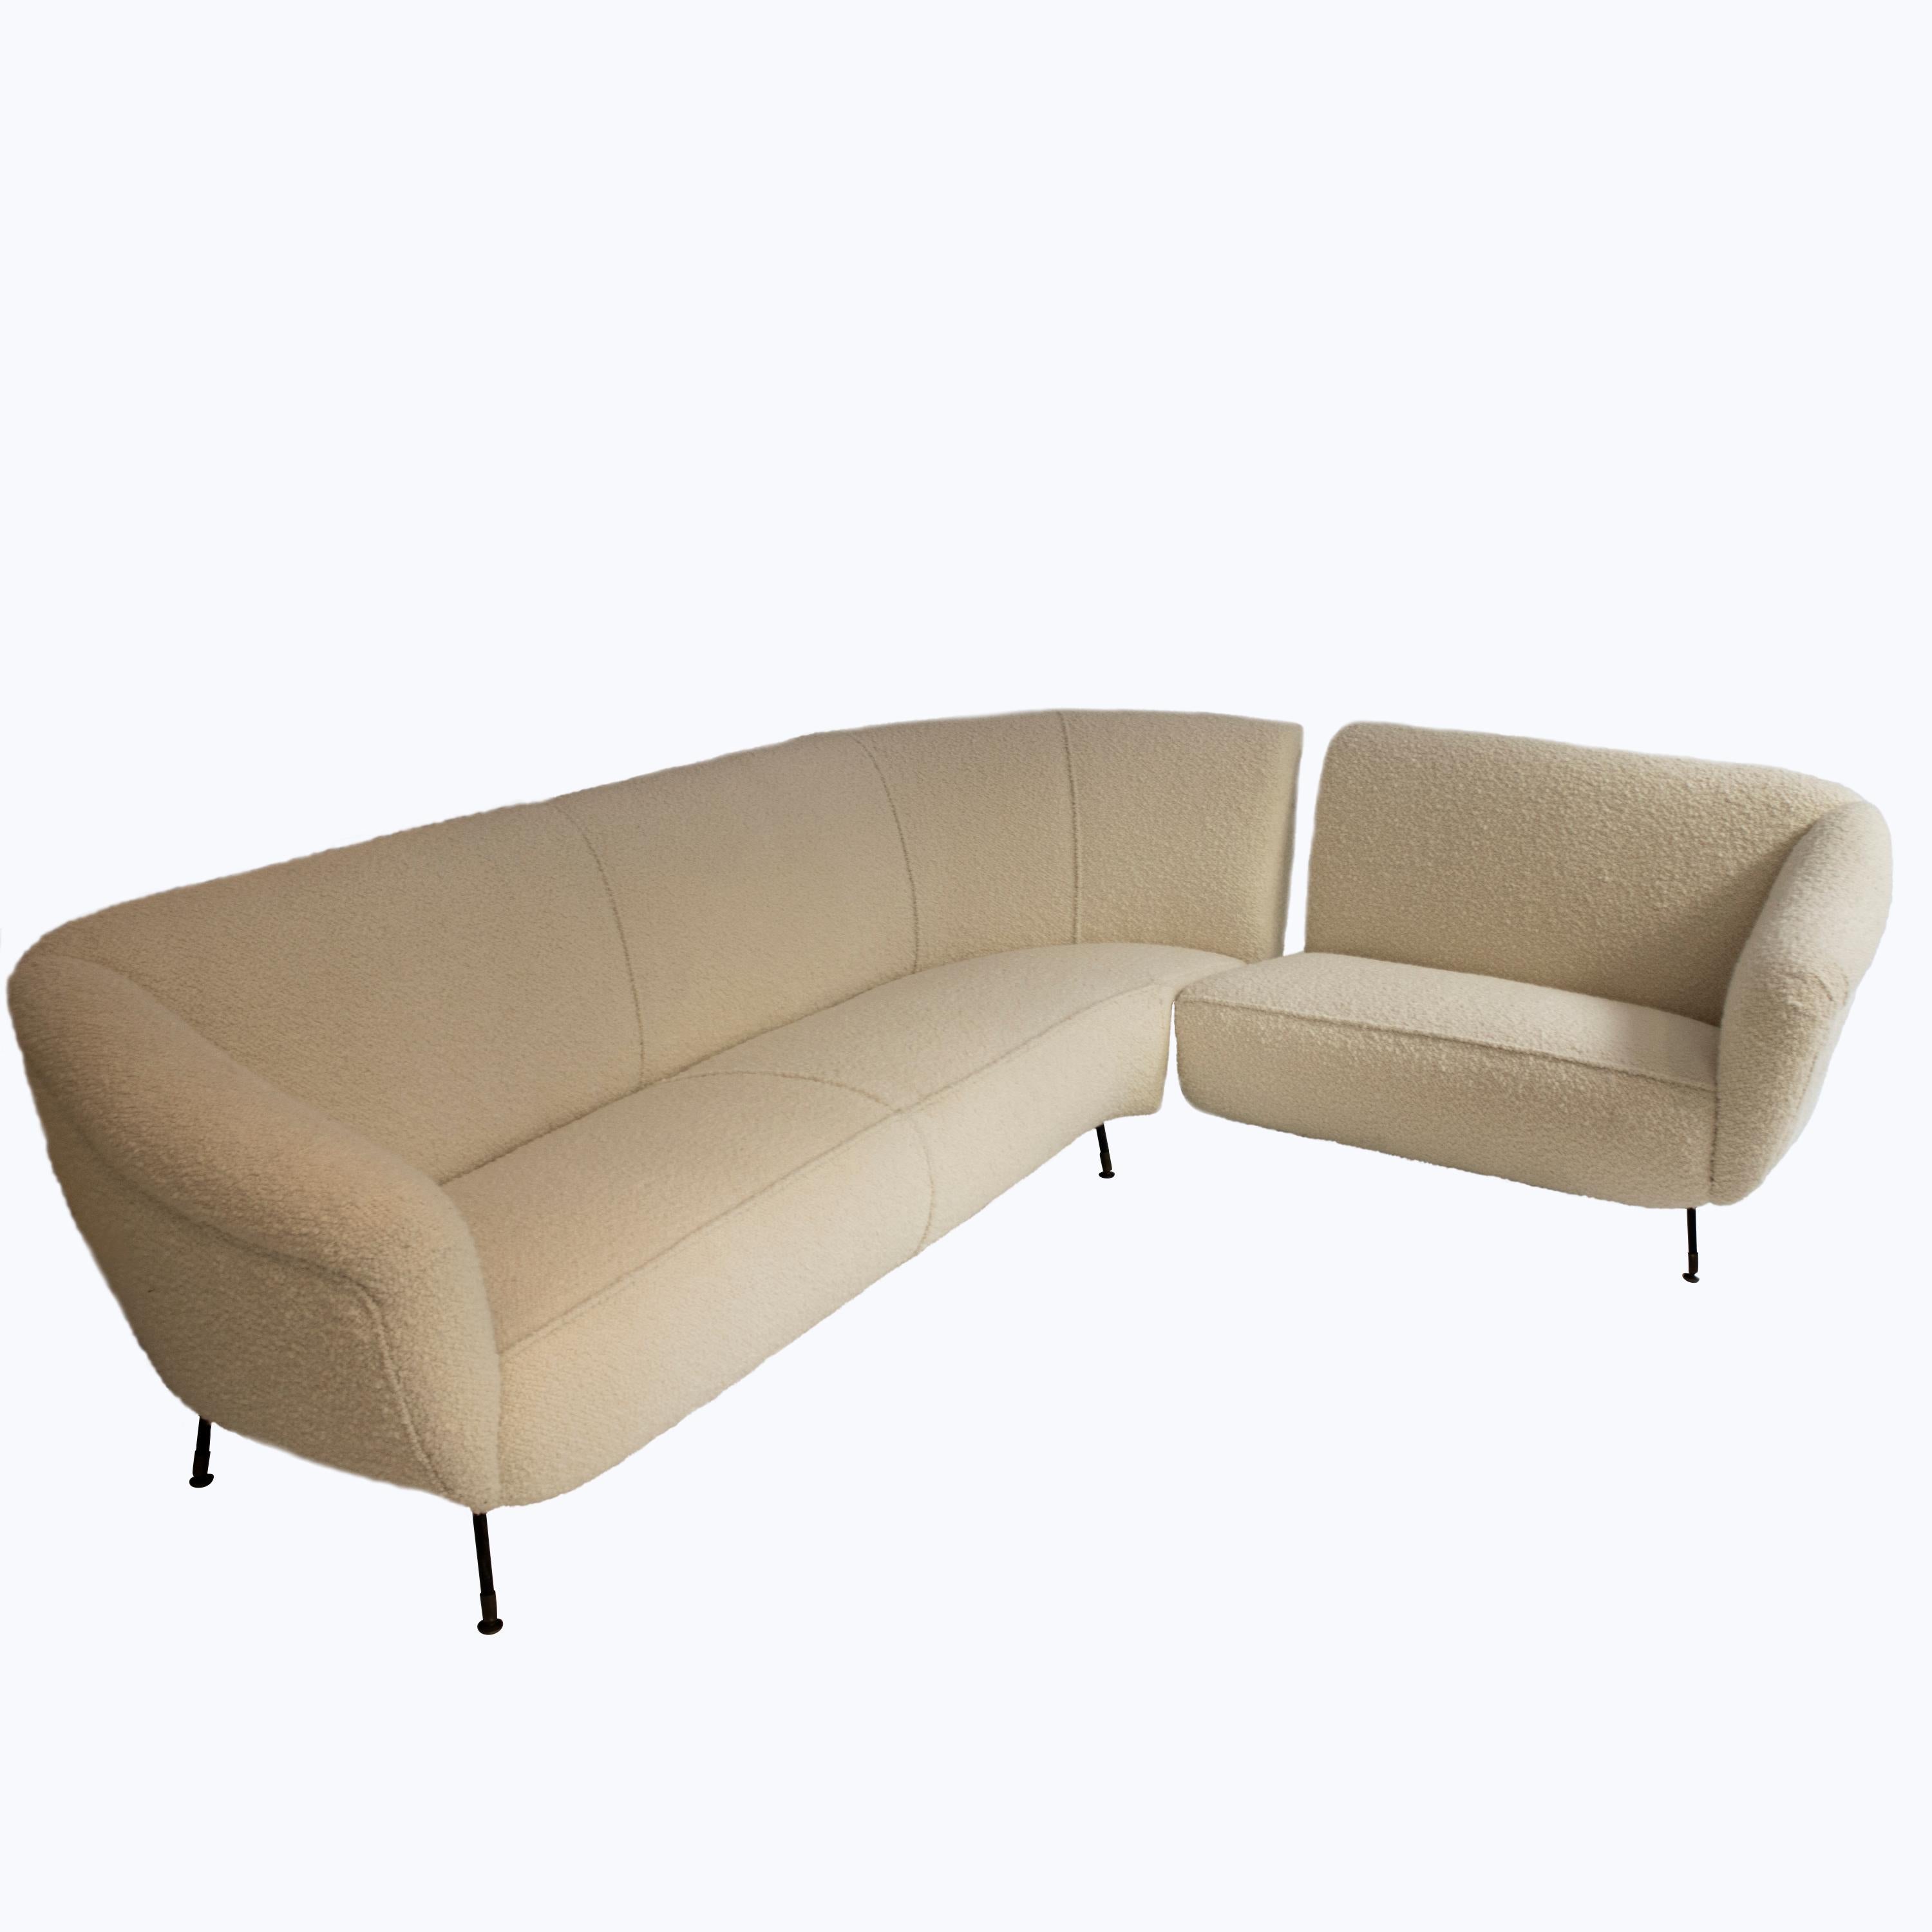 An L-shaped corner sofa with a wooden structure and a metal base, reupholstered in wool Buclé, Italy, 1950s. The Sofa consists of two connected pieces and metal legs.